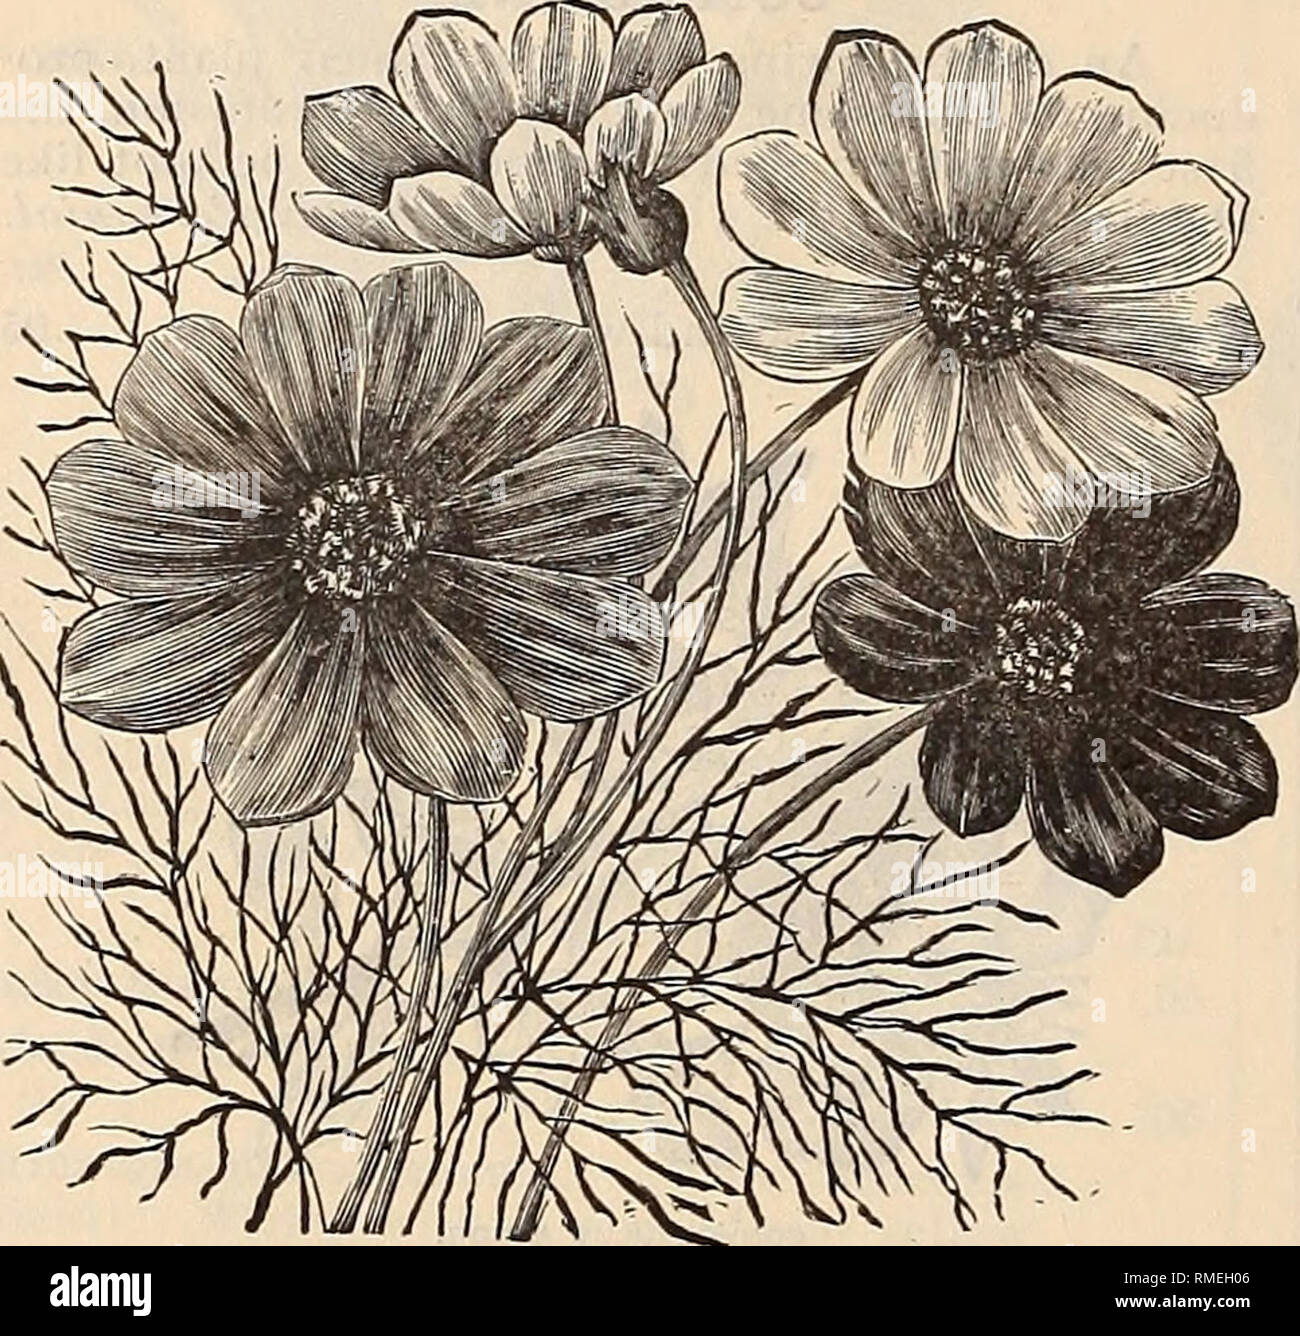 . Annual catalogue of seeds and plants. Nurseries (Horticulture), Minnesota, Catalogs; Vegetables, Seeds, Catalogs; Flowers, Catalogs. 5° SCHLEGEL !^ FOTTLER'S SEED CATALOGUE. COREOPSIS, or CALLIOPSIS. Showy hardj' plants, with rich brightly-colored flowers through the entire season; very useful for cutting. Hardy Annual. pkt. Finest Mixed Oz., .40 .05 Atrosanguinea. B 1 o o d r e d, m a rb 1 e d. 2 ft Oz., .50 .05 Bicolor Marmorata. Golden-yellow, w ith pur- plish-brown centre. 2 ft.' . Oz., .40 .05 Coronata. Large, fine yellows 2 ft. &quot; .40 .05 Drummondi. Large vellow, red spot. 2 ft ' . Stock Photo